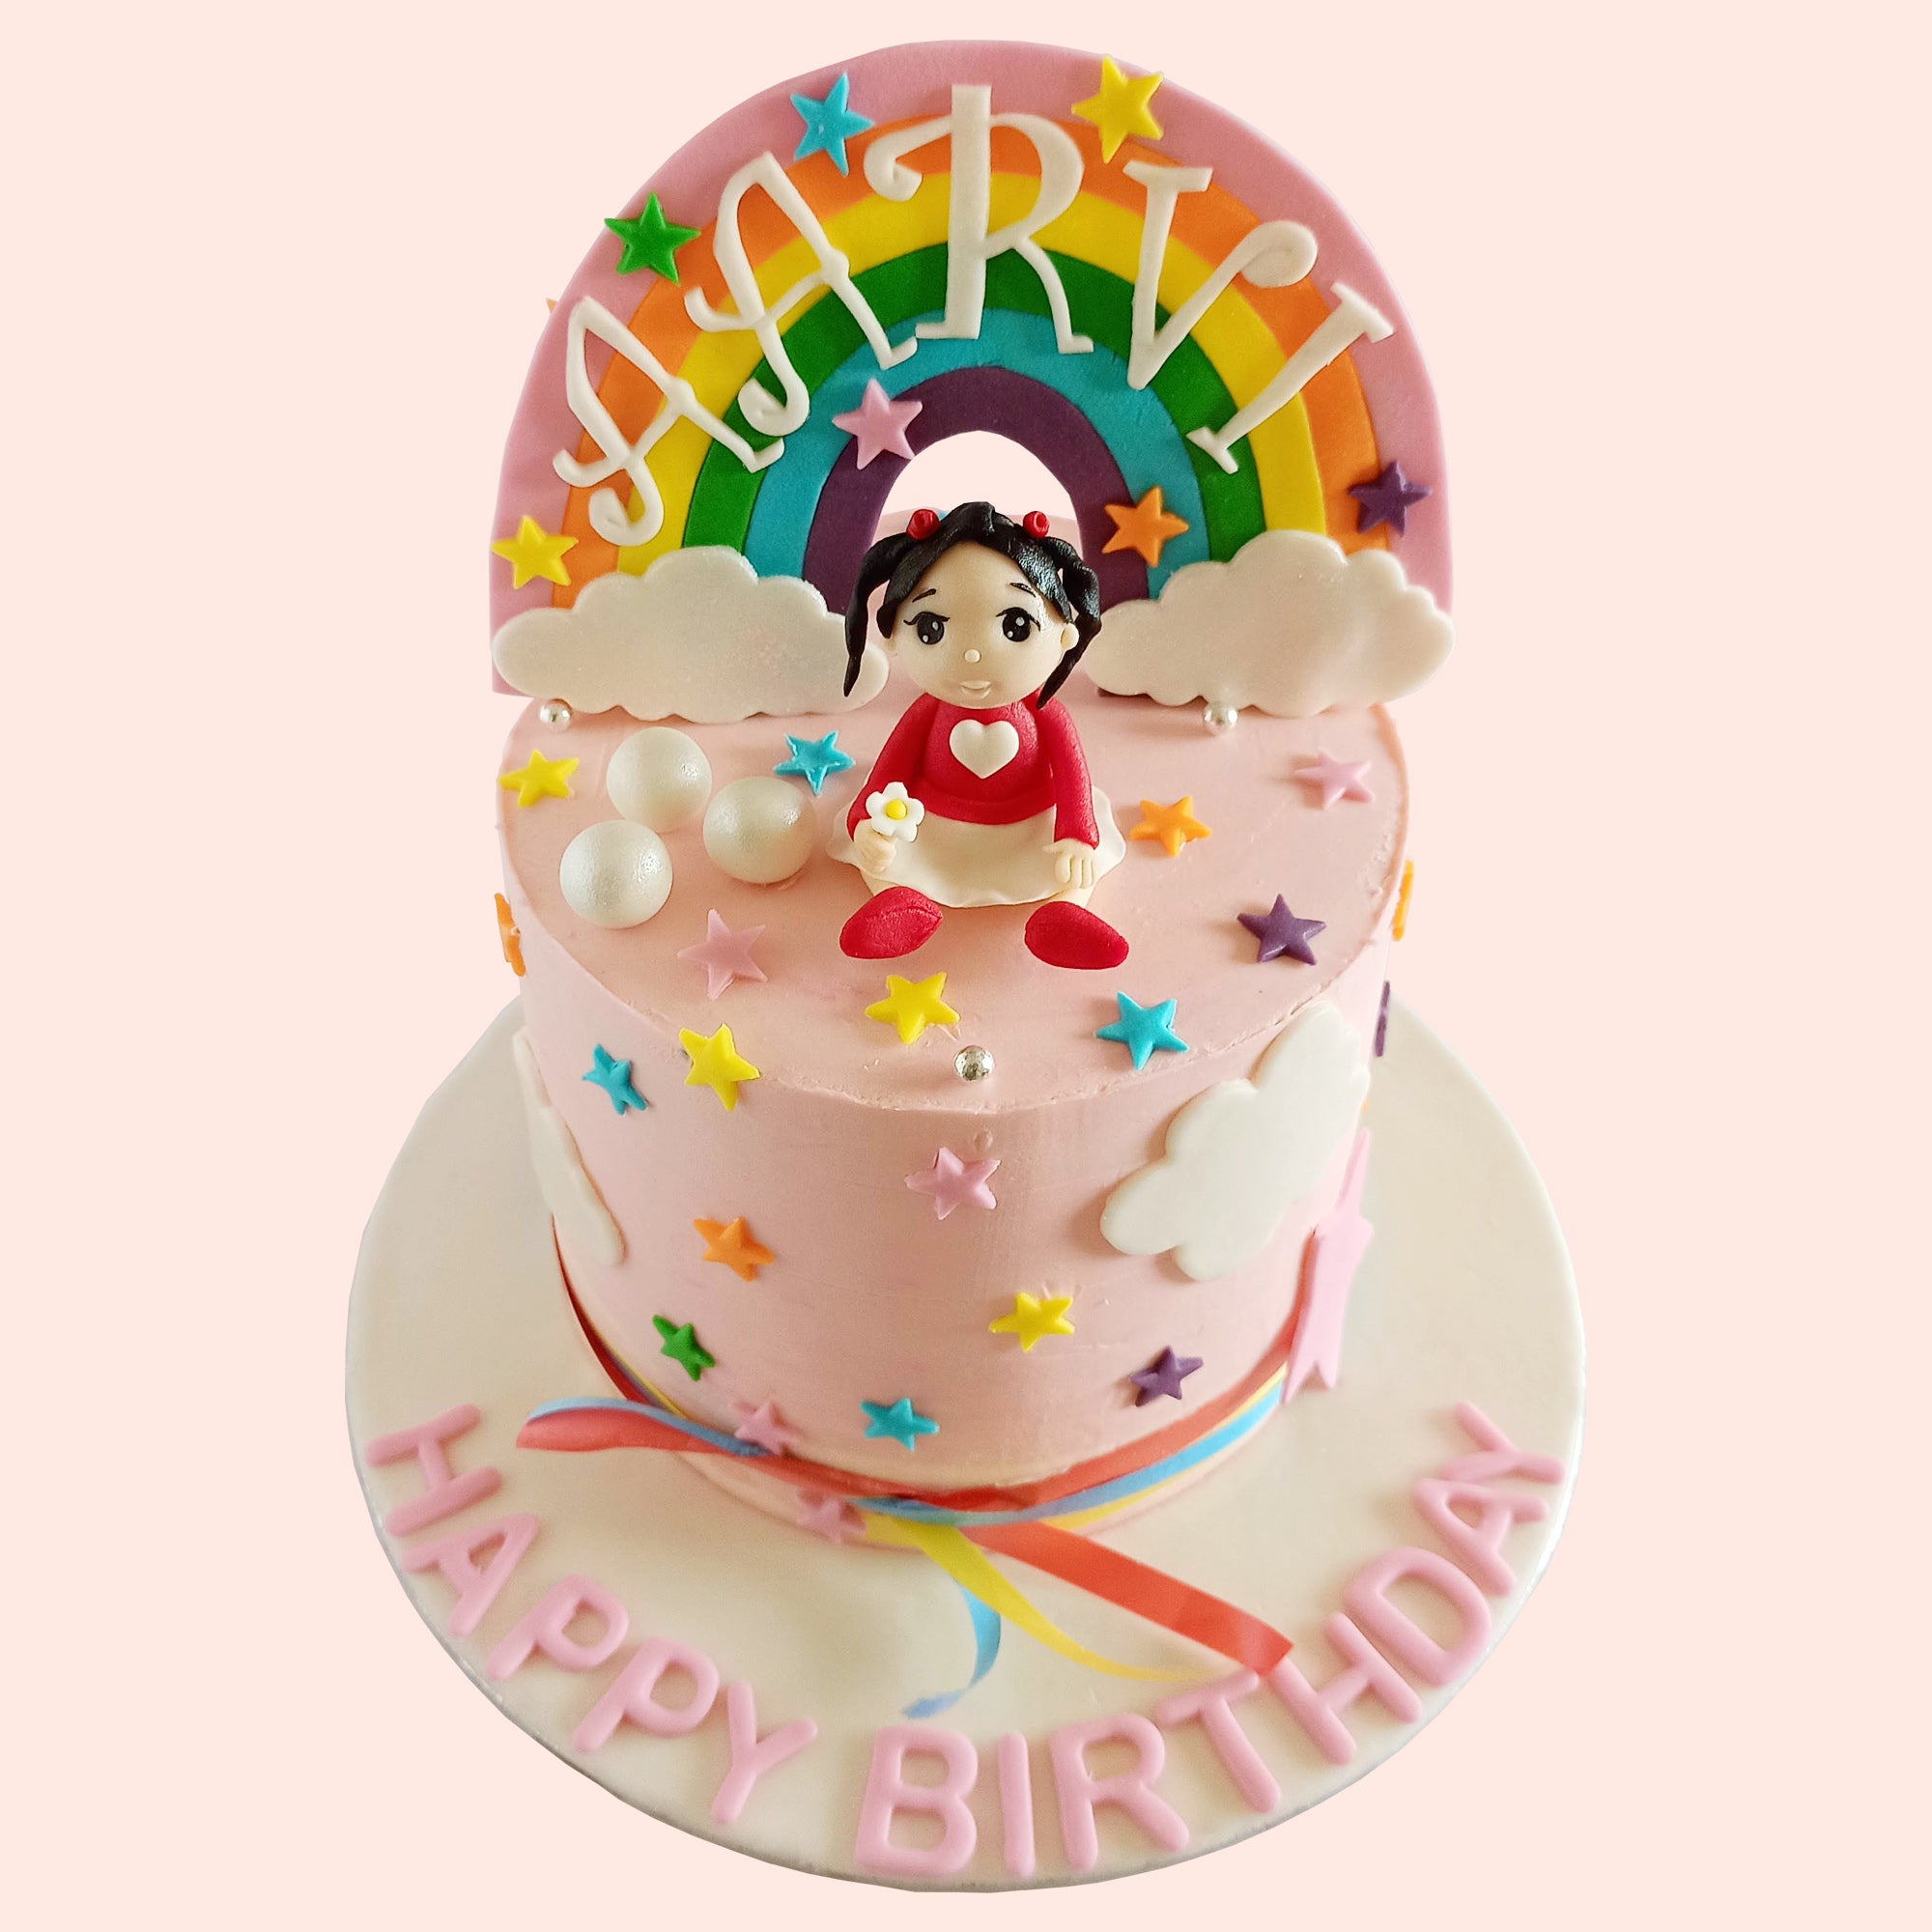 Glitter Twodles Cake Topper, Mickey Birthday Cake Decor 2nd Cake Decorations  Baby Boy Second Birthday Party Supplies : Amazon.in: Grocery & Gourmet Foods